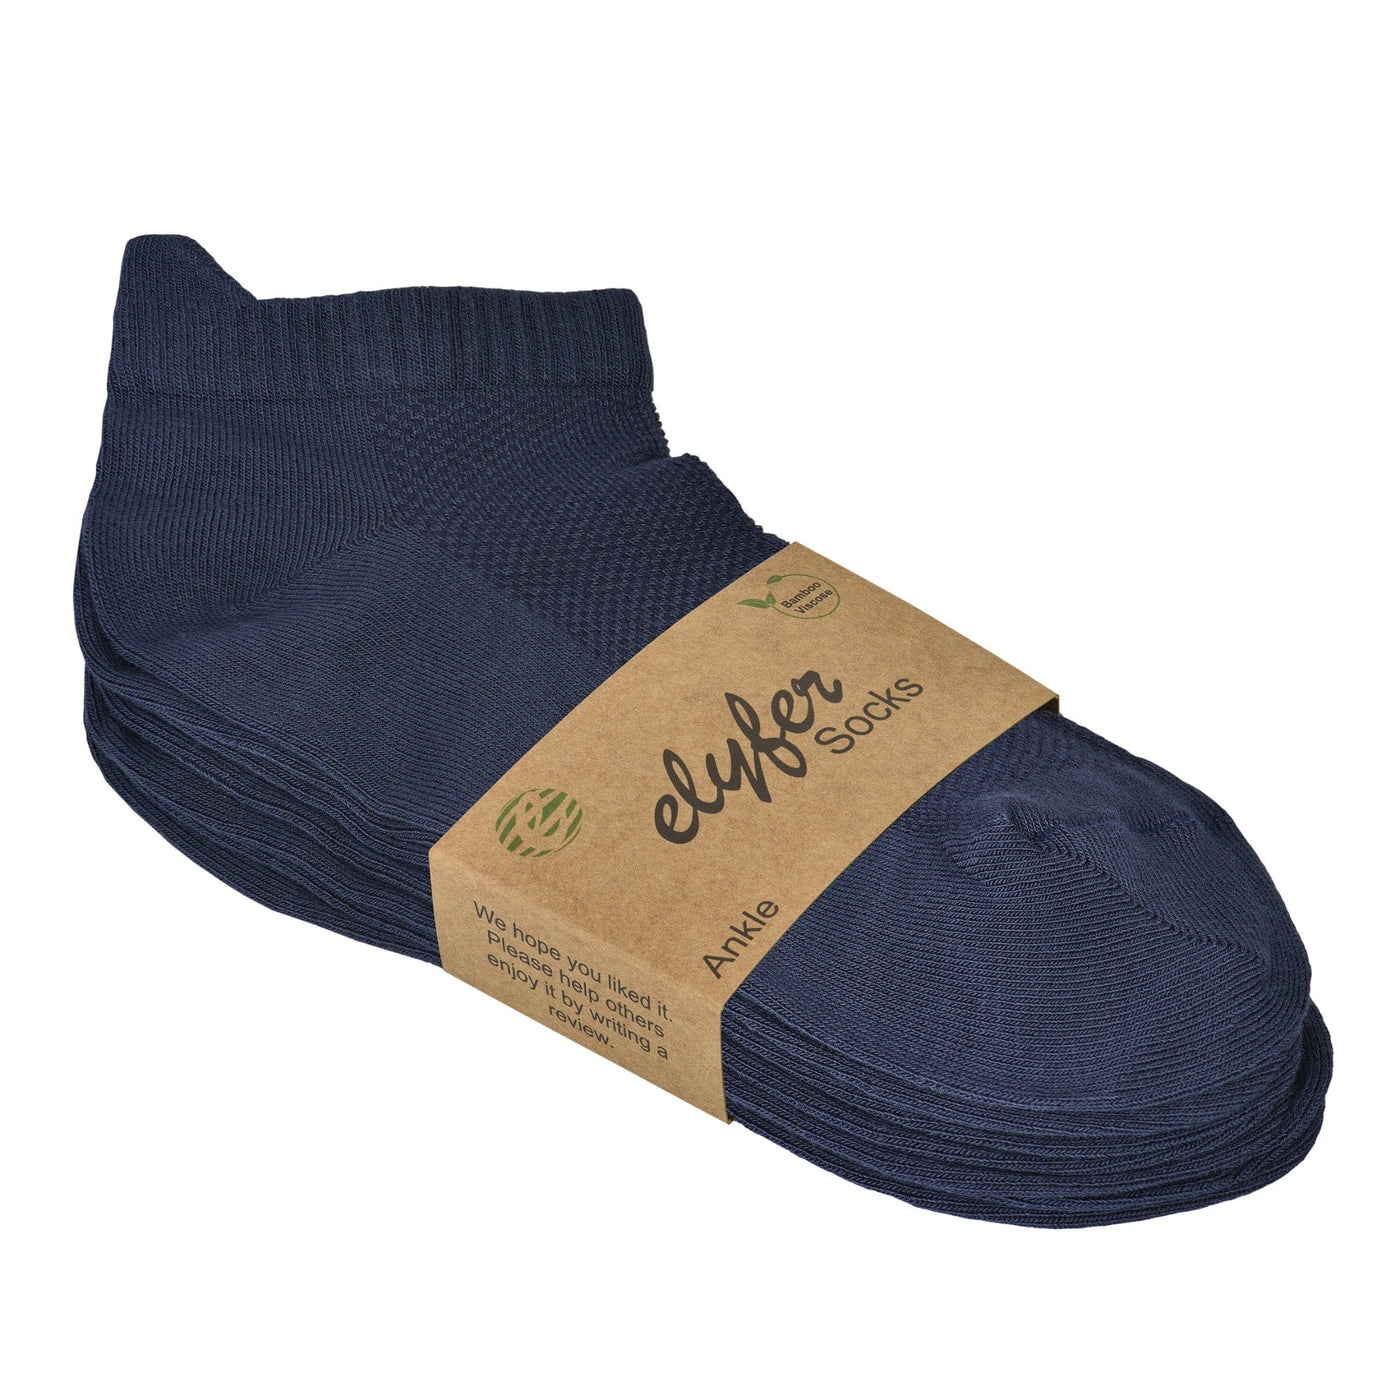 Unisex Ankle Socks - 4 Pairs - Bamboo Low Cut Ankle Breathable Sports Unisex Ankle Socks - 4 Pairs - Bamboo Low Cut Ankle Breathable Sports #color_navy